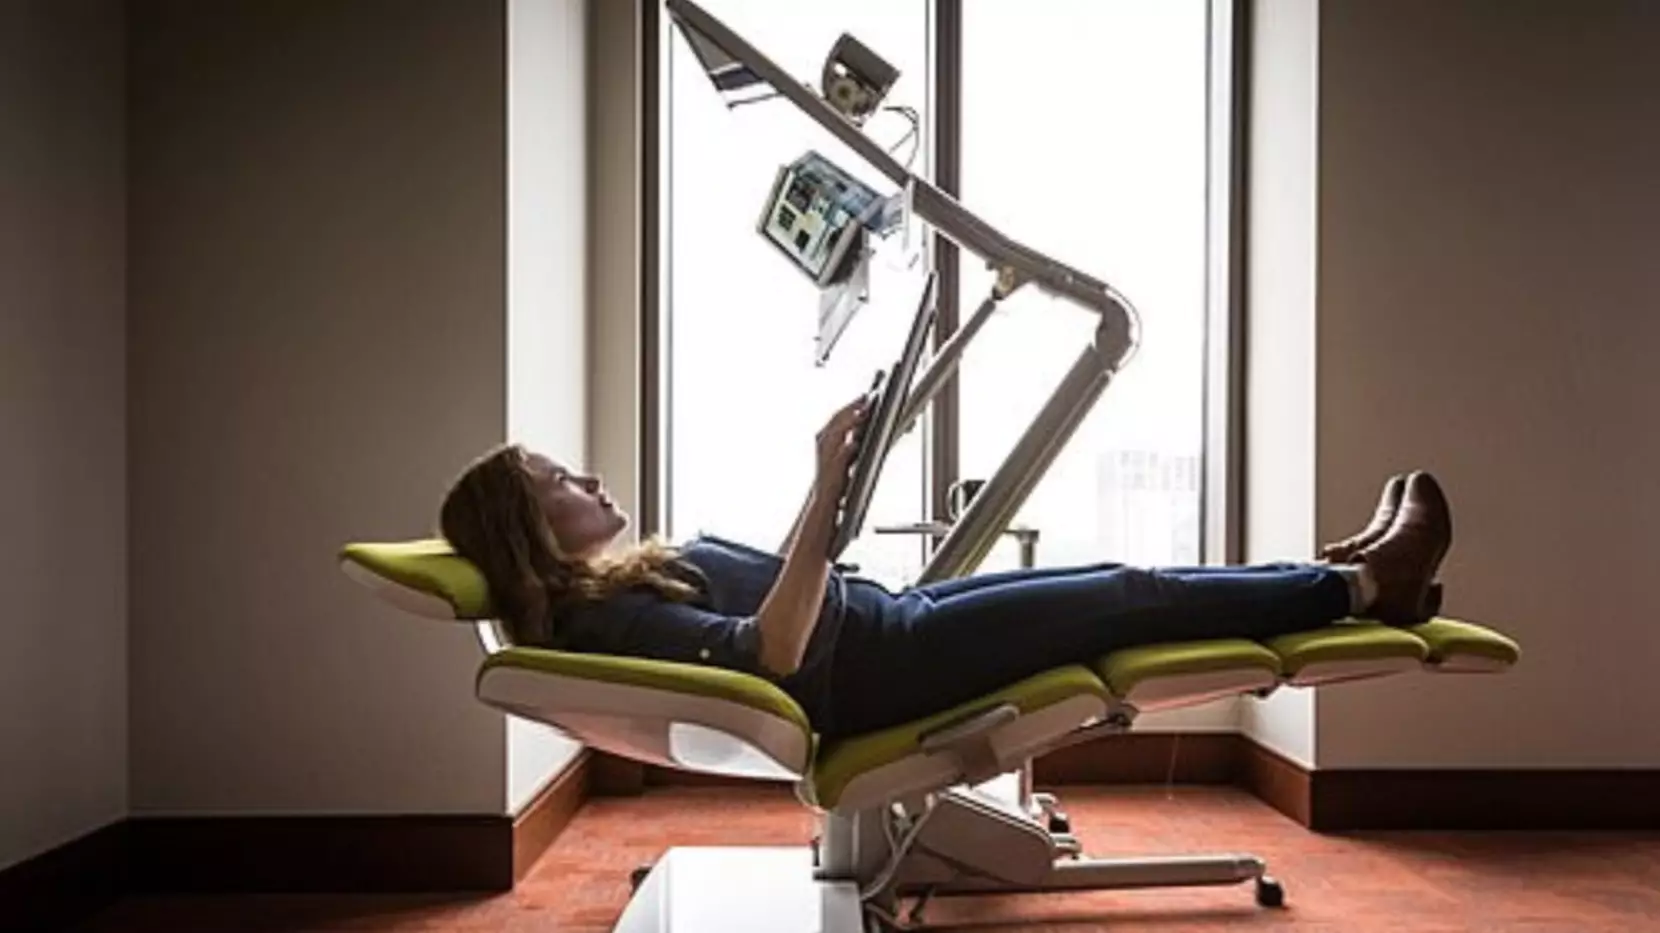 Company Develops Futuristic Office Desk That Allows You To Work On Your Back